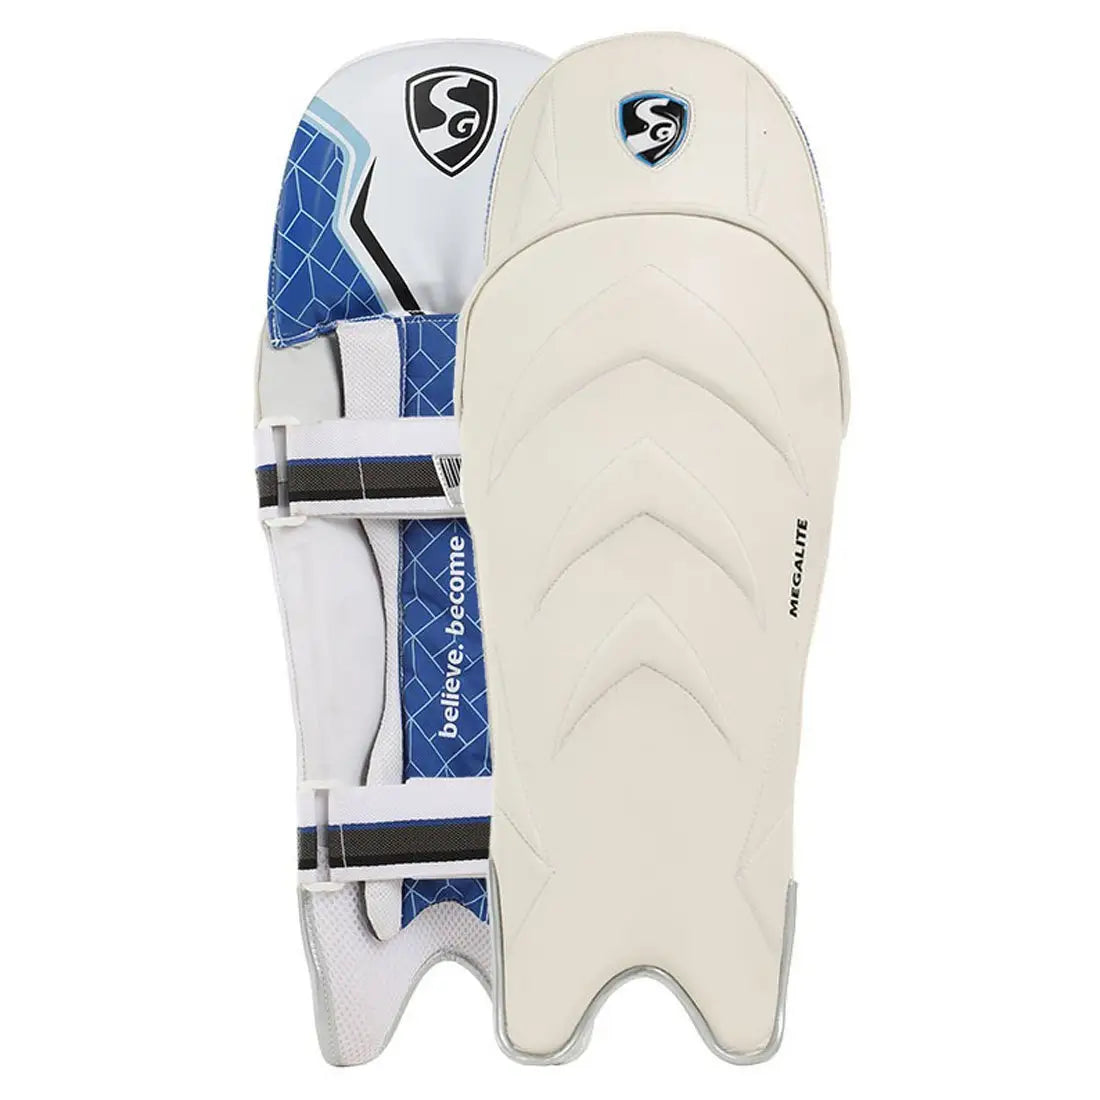 SG Megalite Cricket Wicket Keeper Pads Legguard Keeping - Men - PADS - WICKET KEEPING